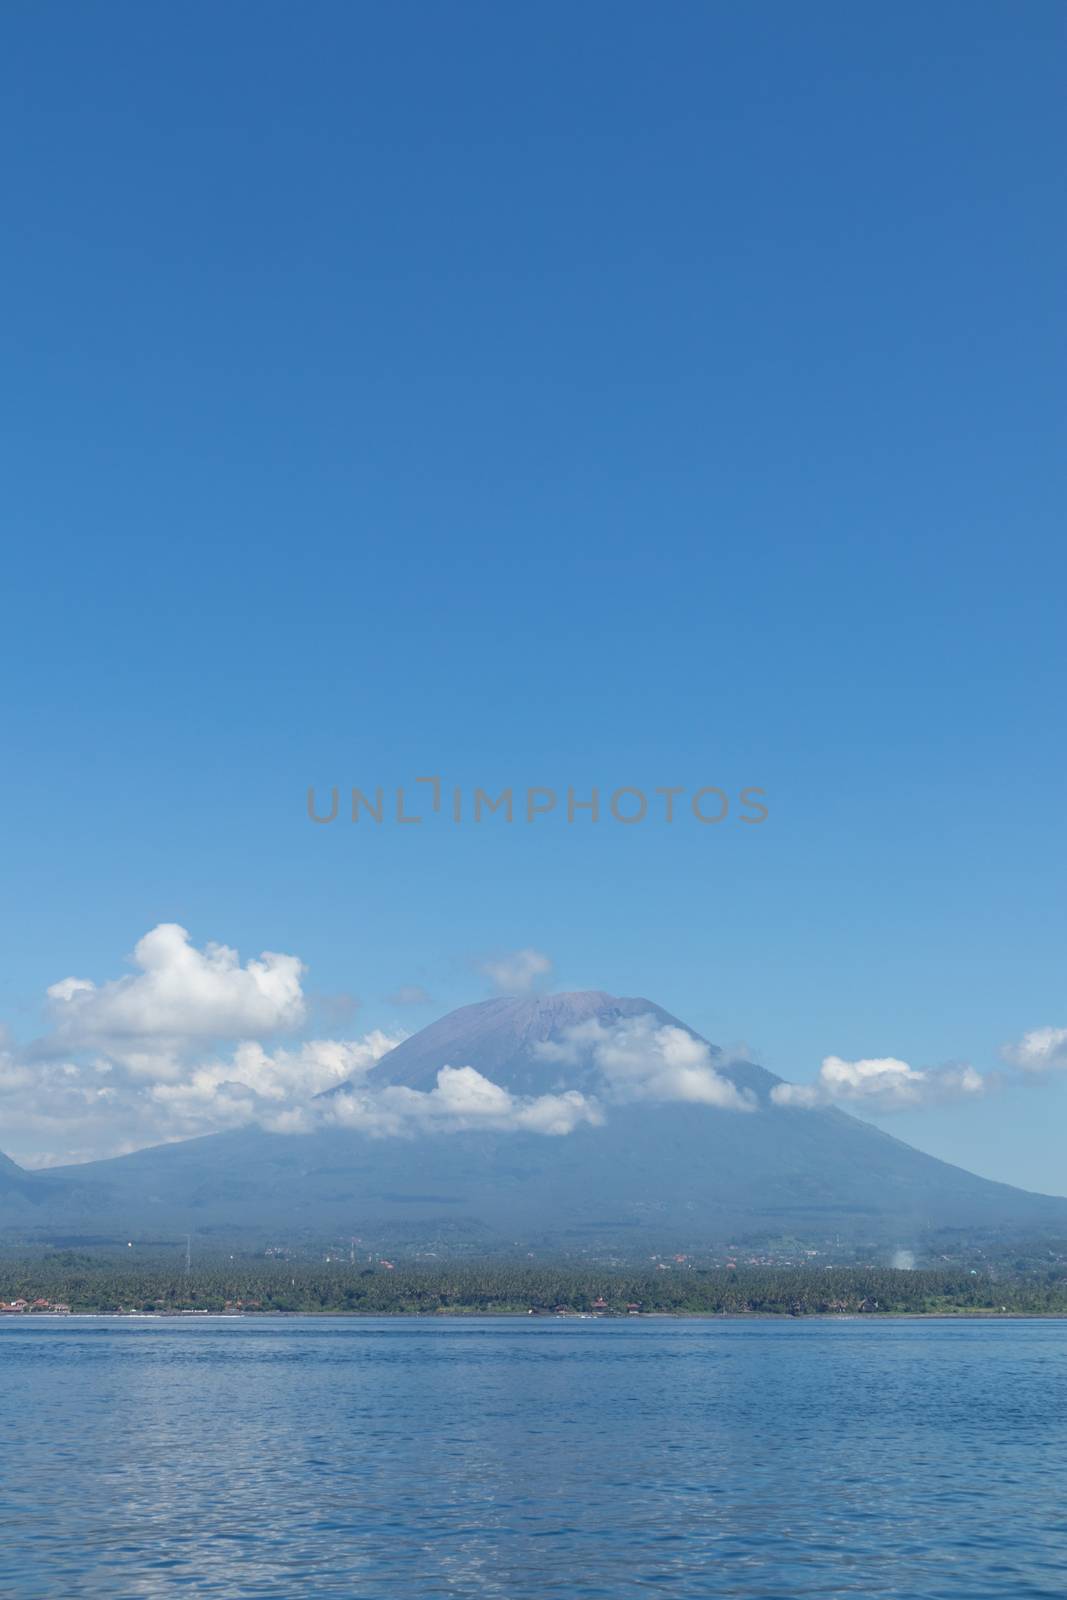 Agung volcano view from the sea. Bali island, Indonesia.